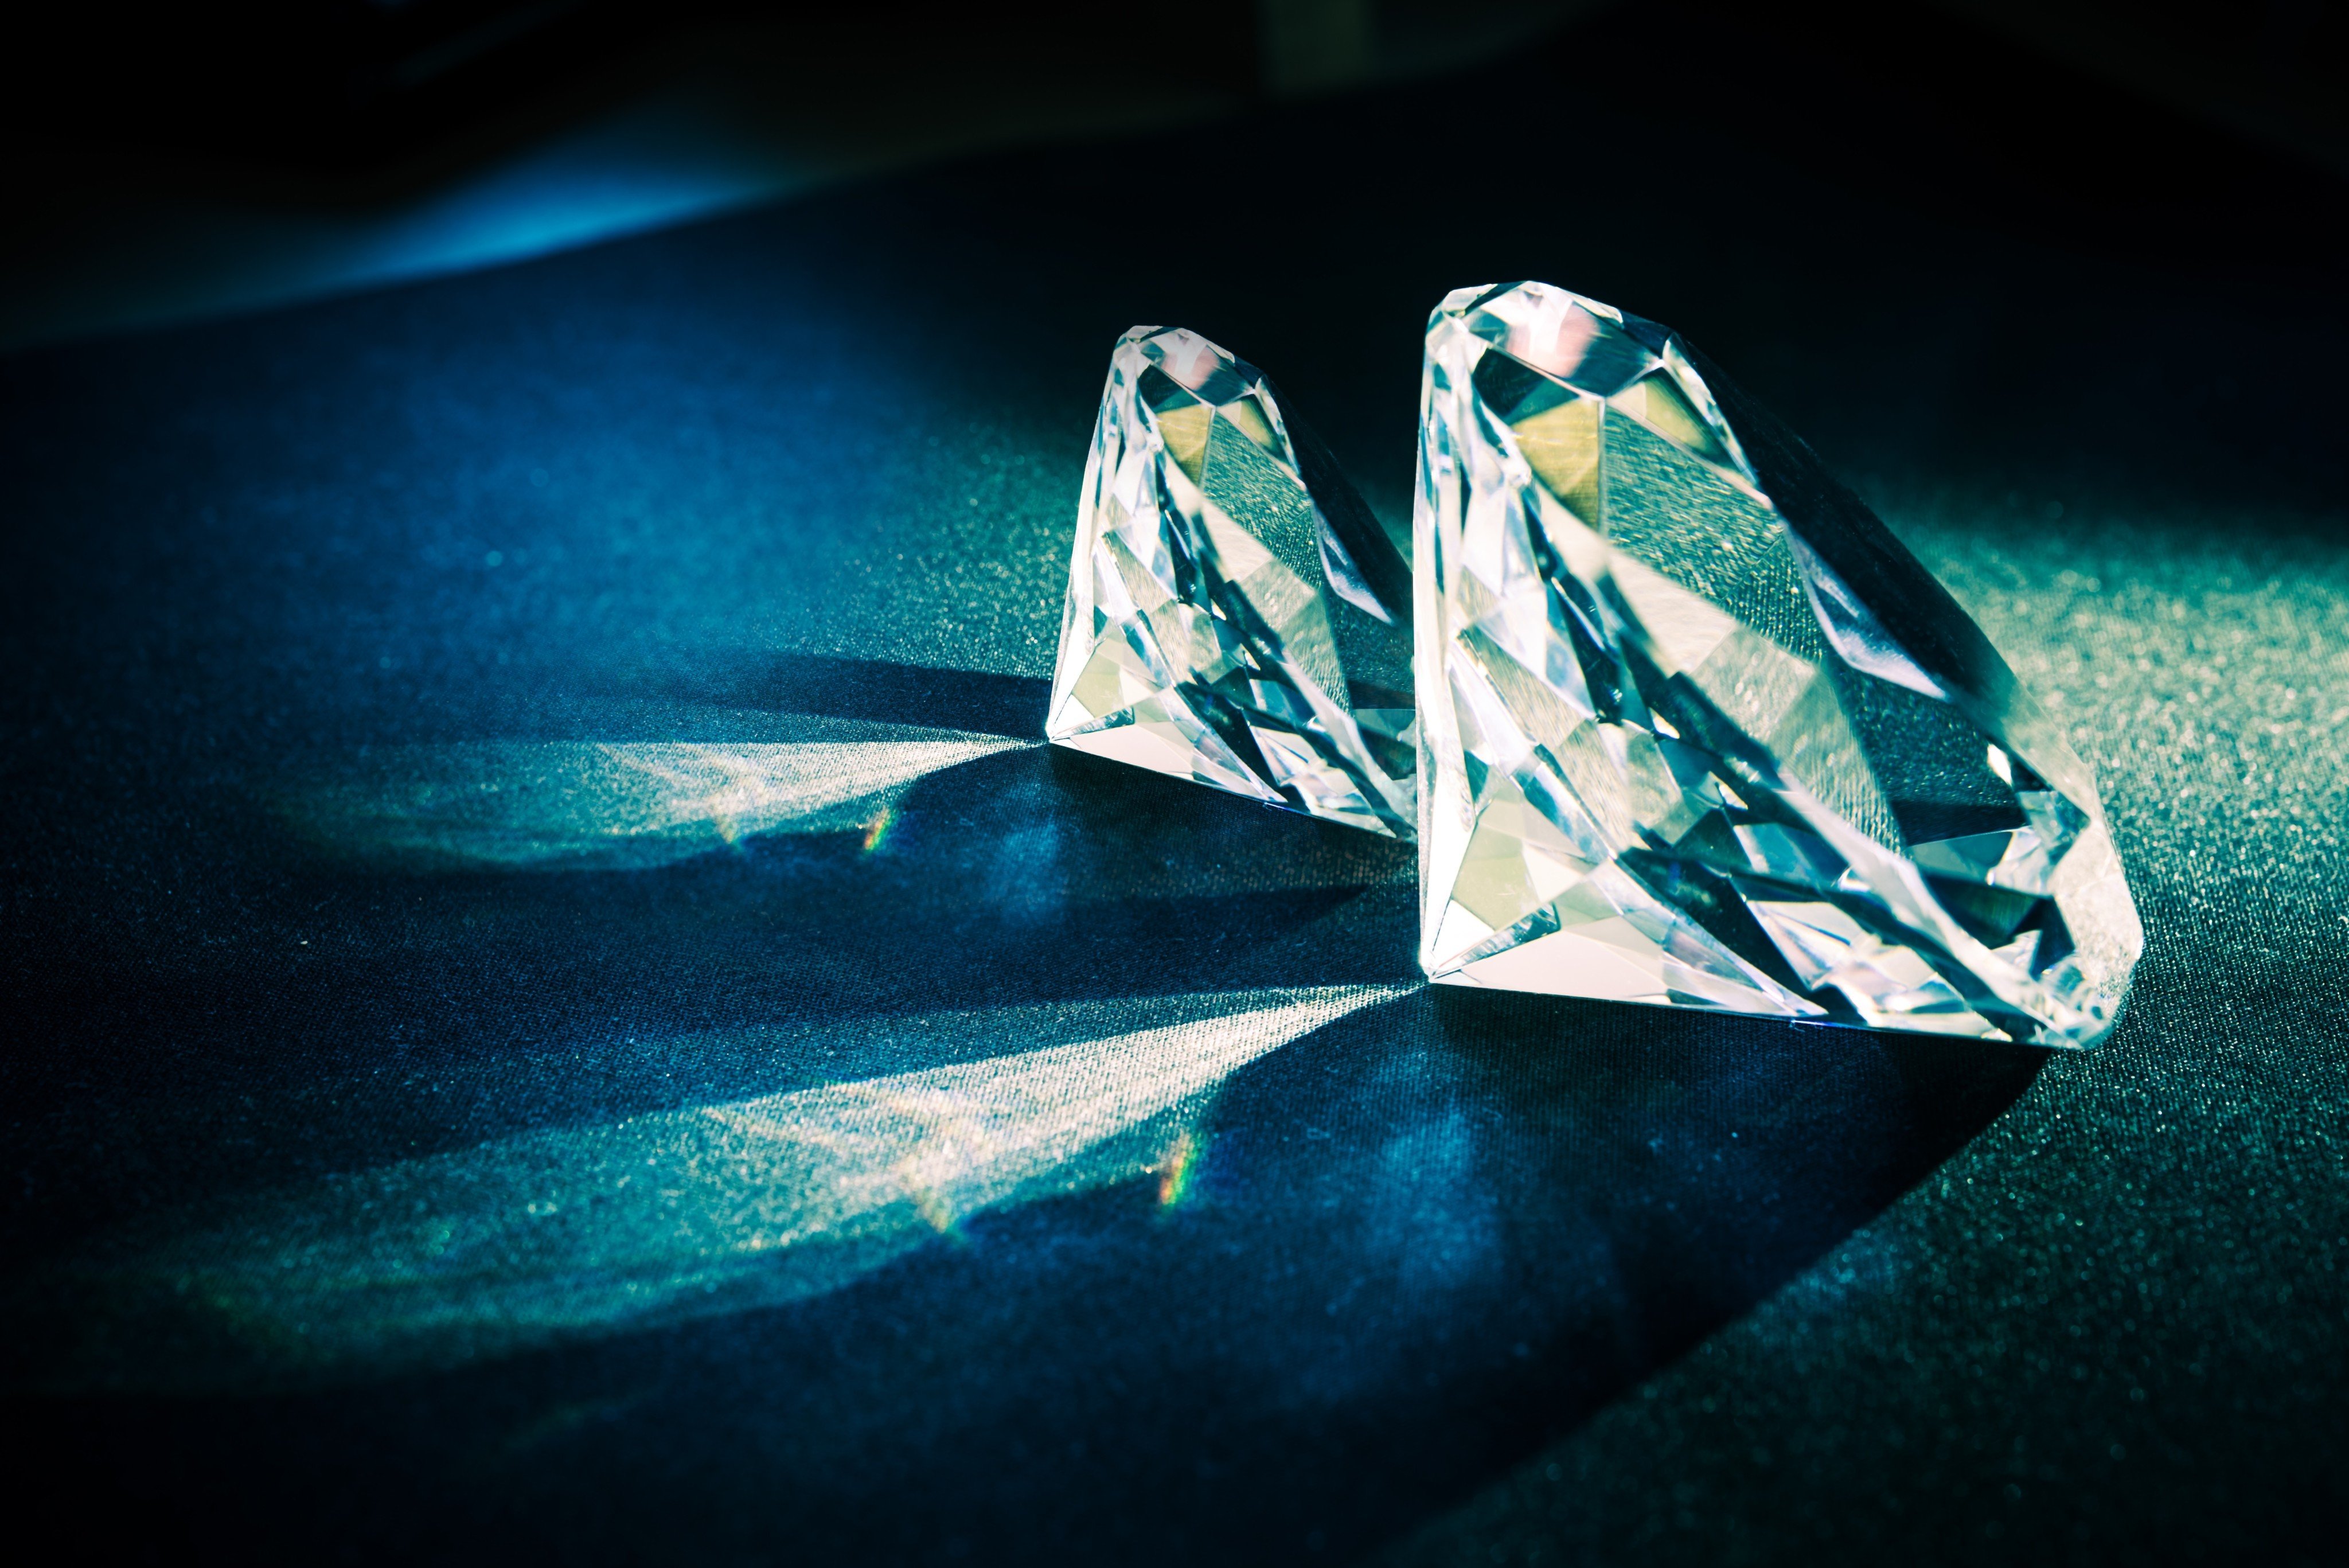 Scientists have combined diamond with graphene to create a material capable of withstanding high heat while conducting electricity. Photo: Shutterstock